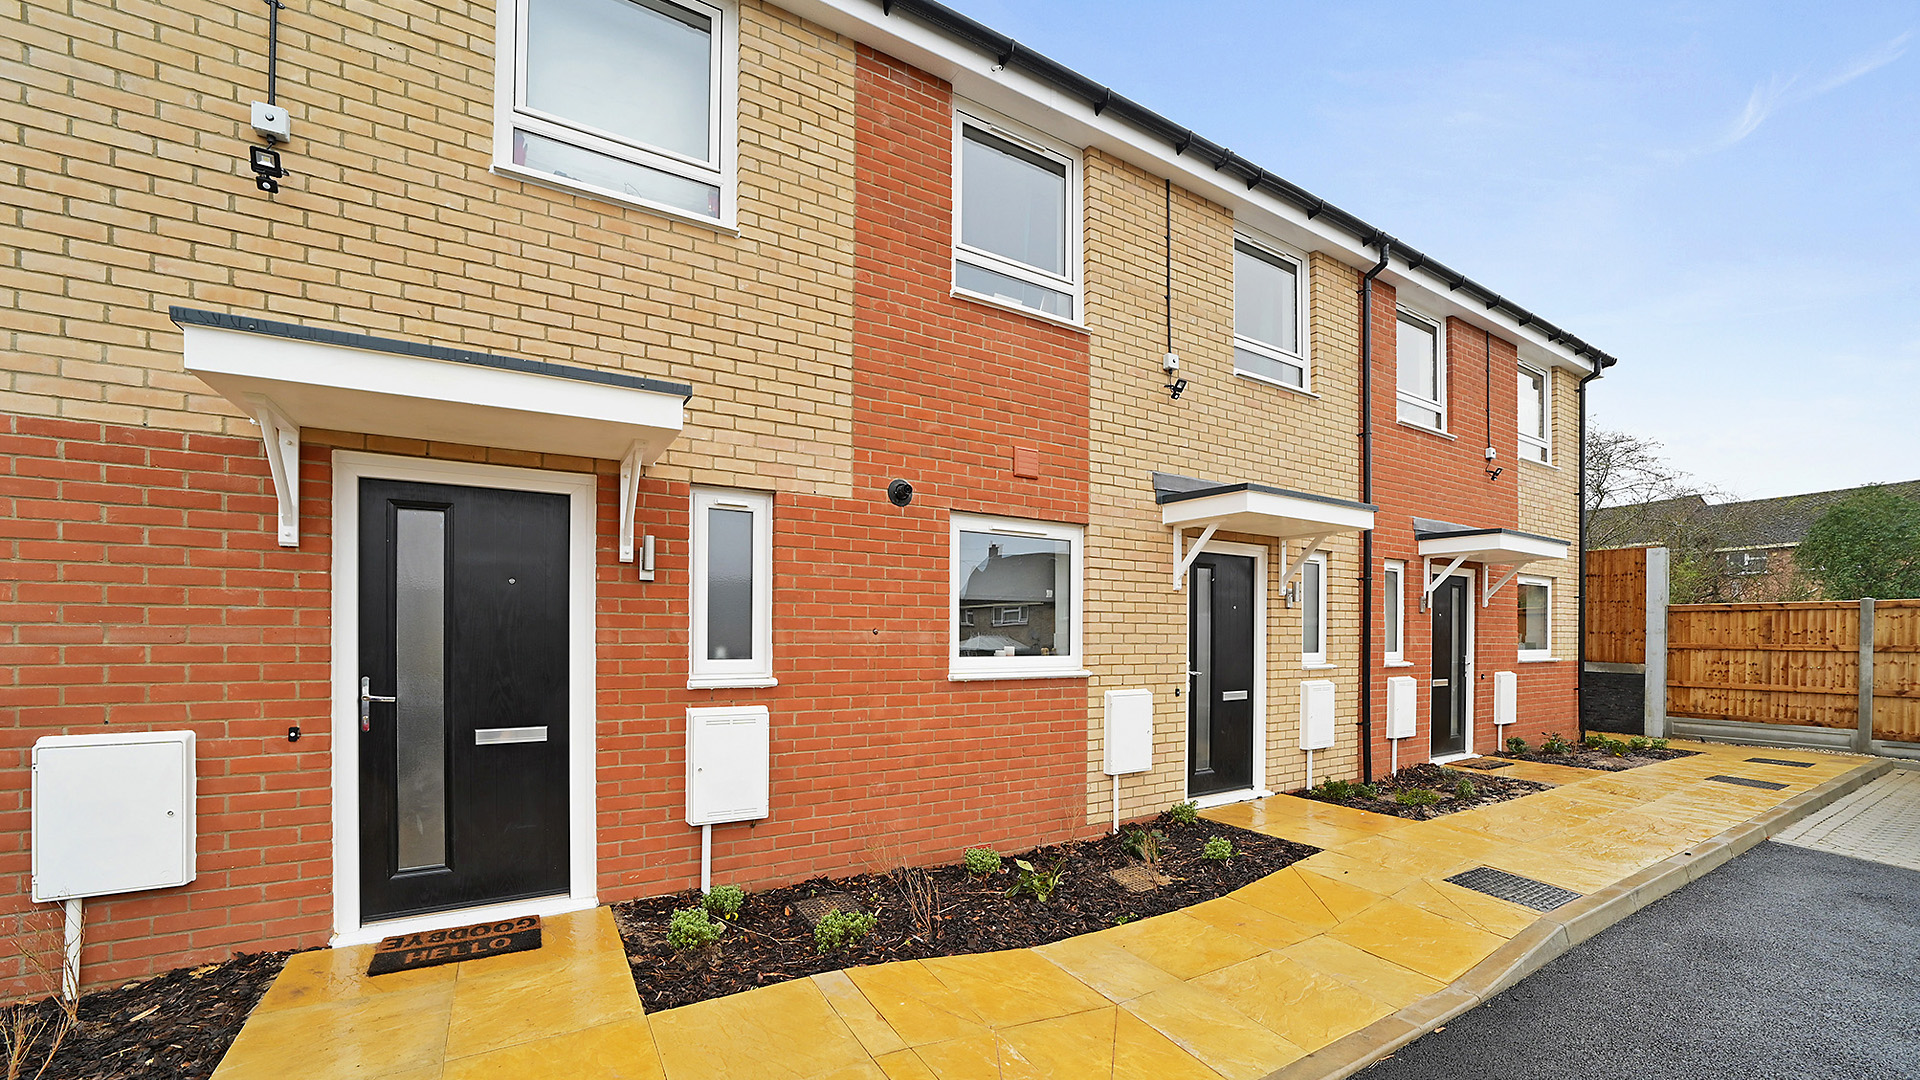 Eastlight Community Homes – Creating Affordable Homes to be proud of